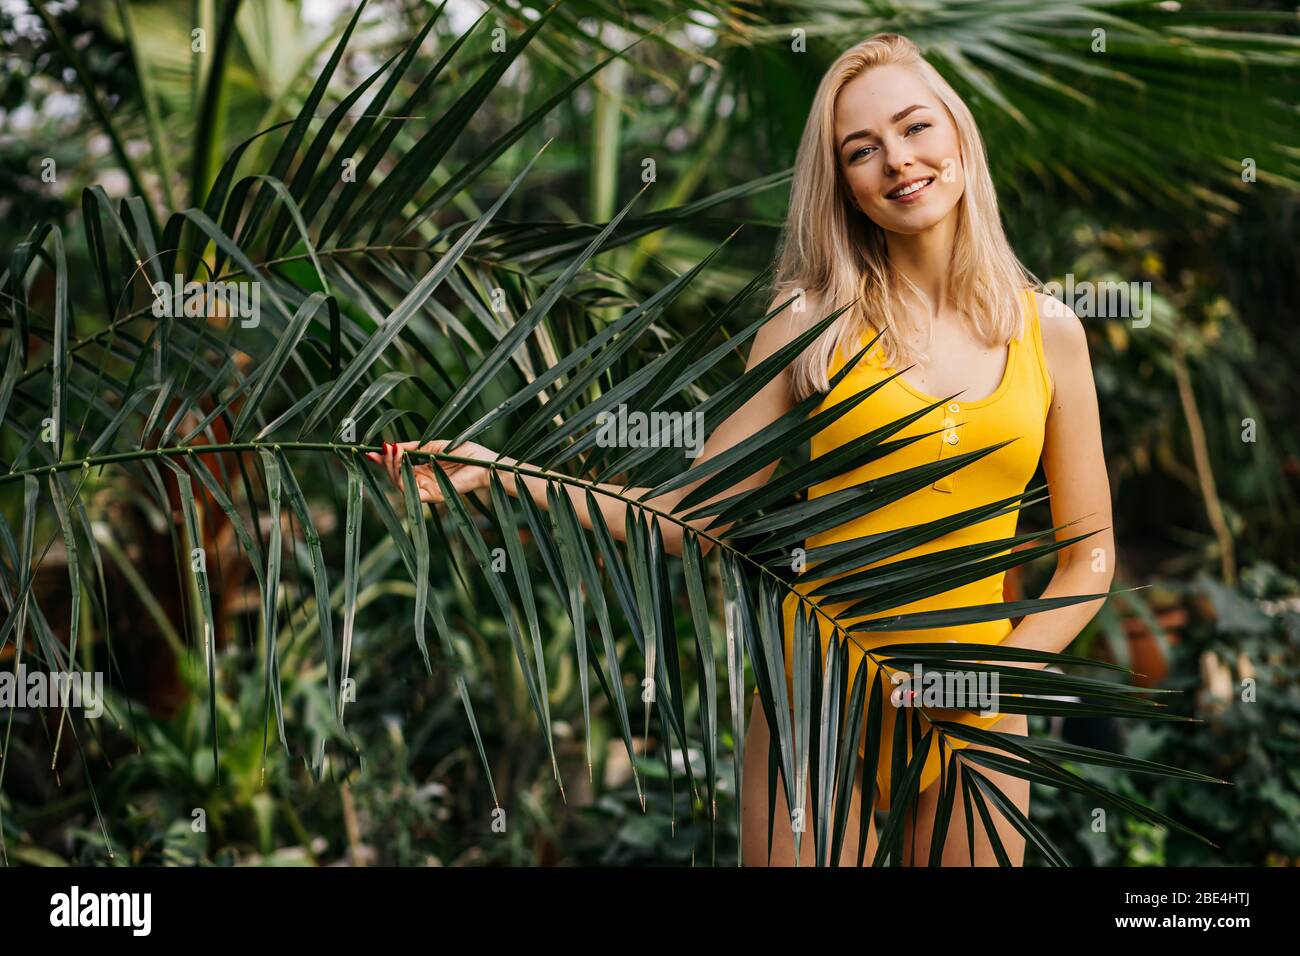 Young sexy woman with slim body, wearing yellow swimsuit standing among tropical trees. Horizontal shot of charming girl smiling posing in green leave Stock Photo